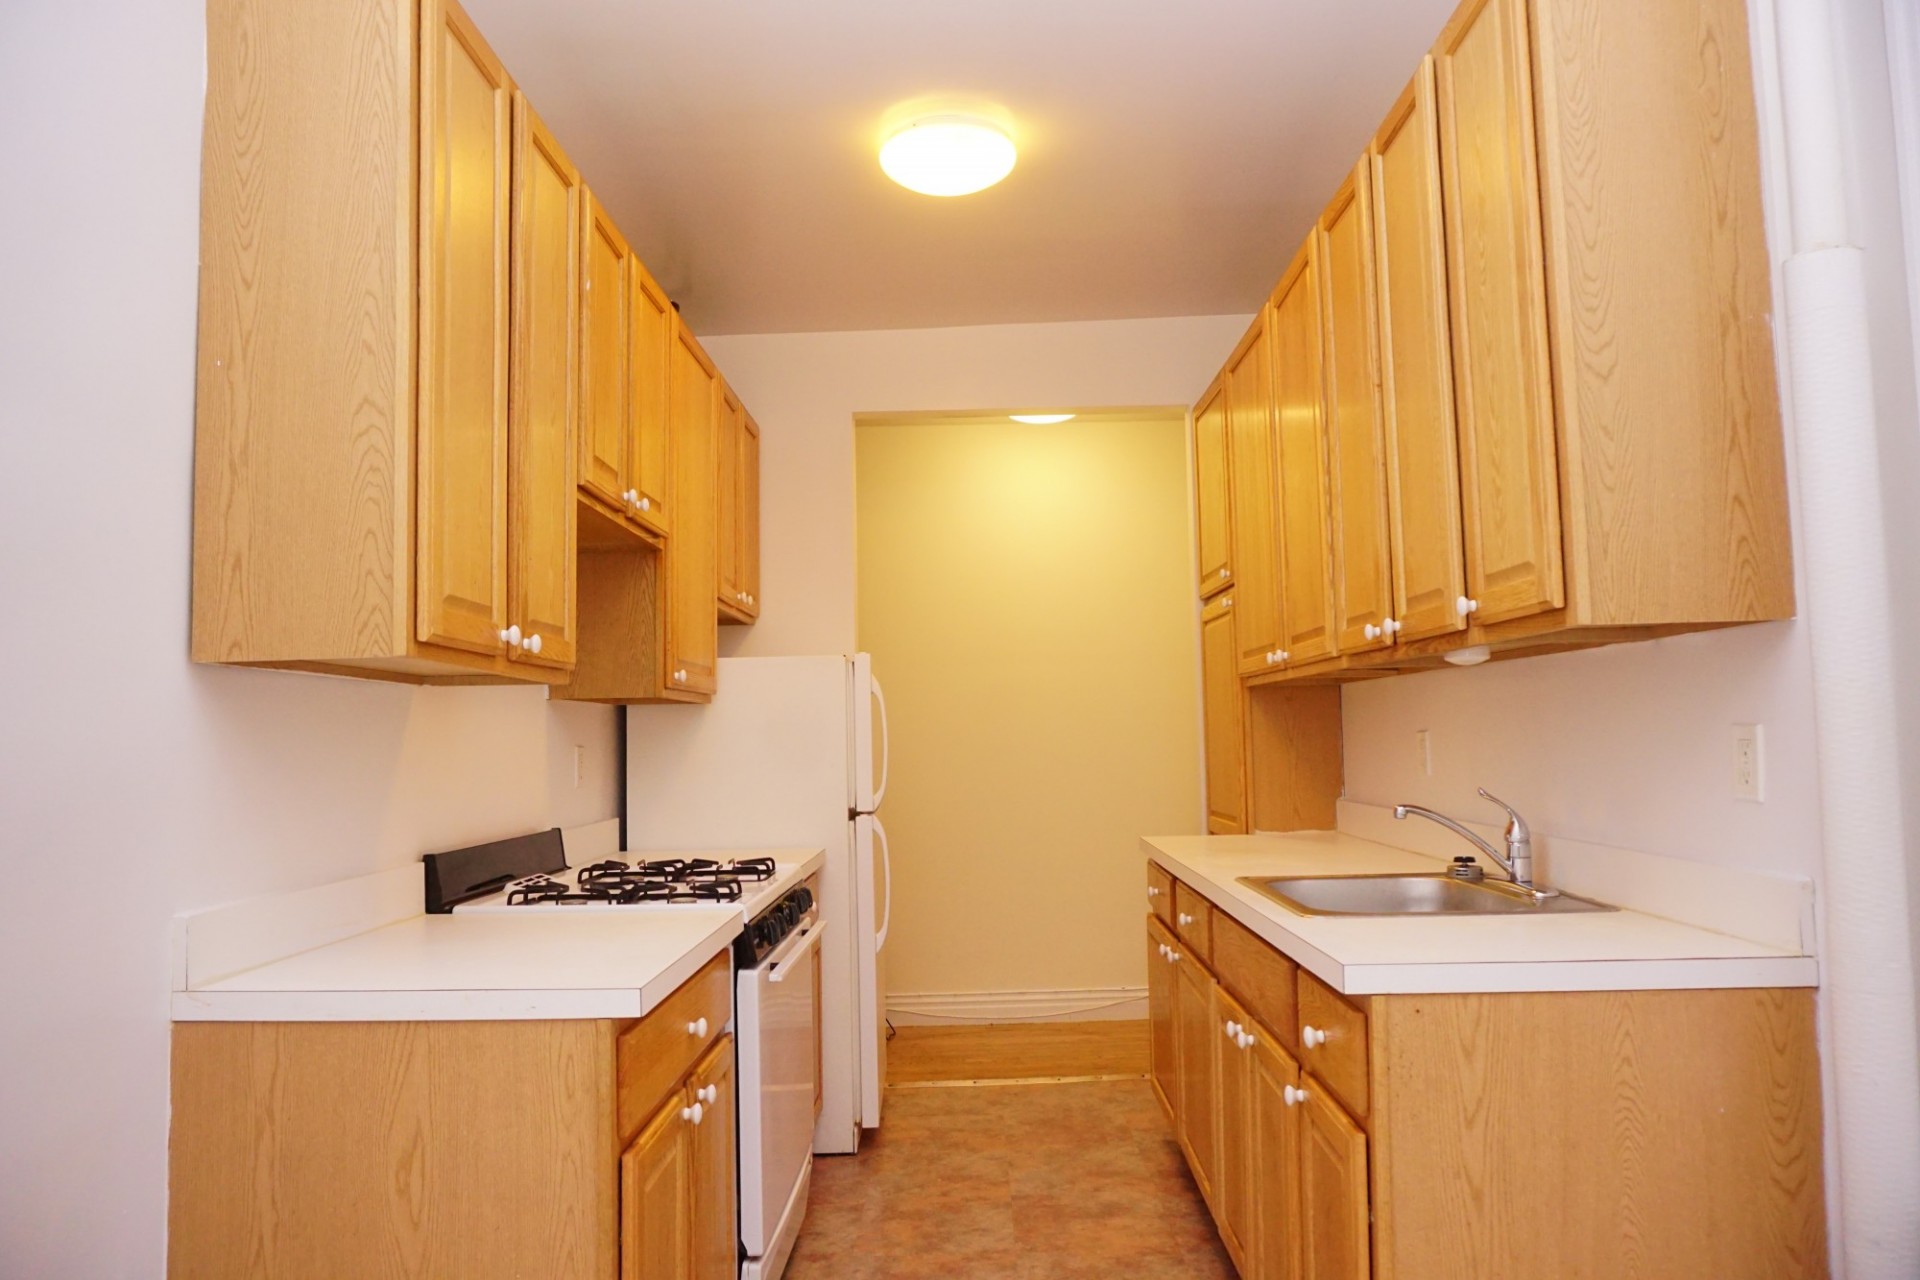 Example of two bedroom family apartment - kitchen view